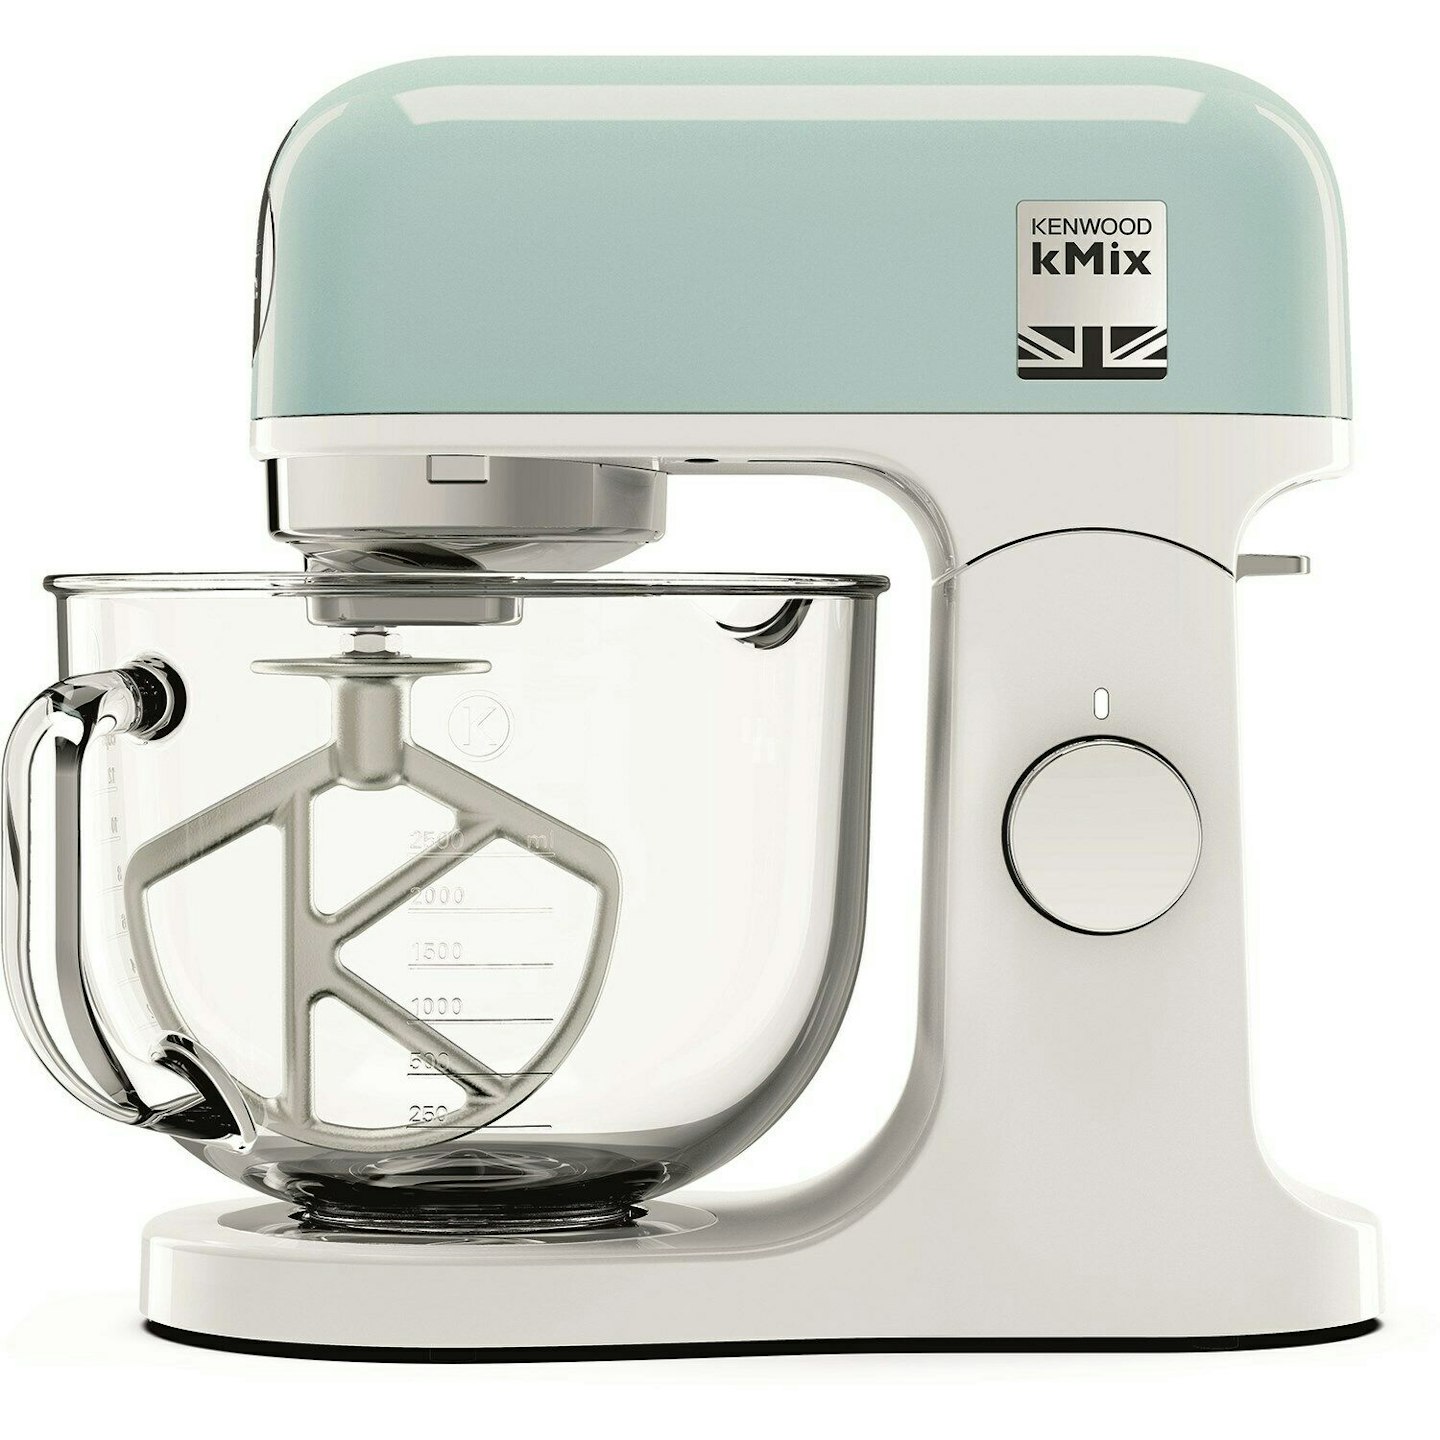 Kenwood kMix Stand Mixer with 5 litre Bowl in Blue